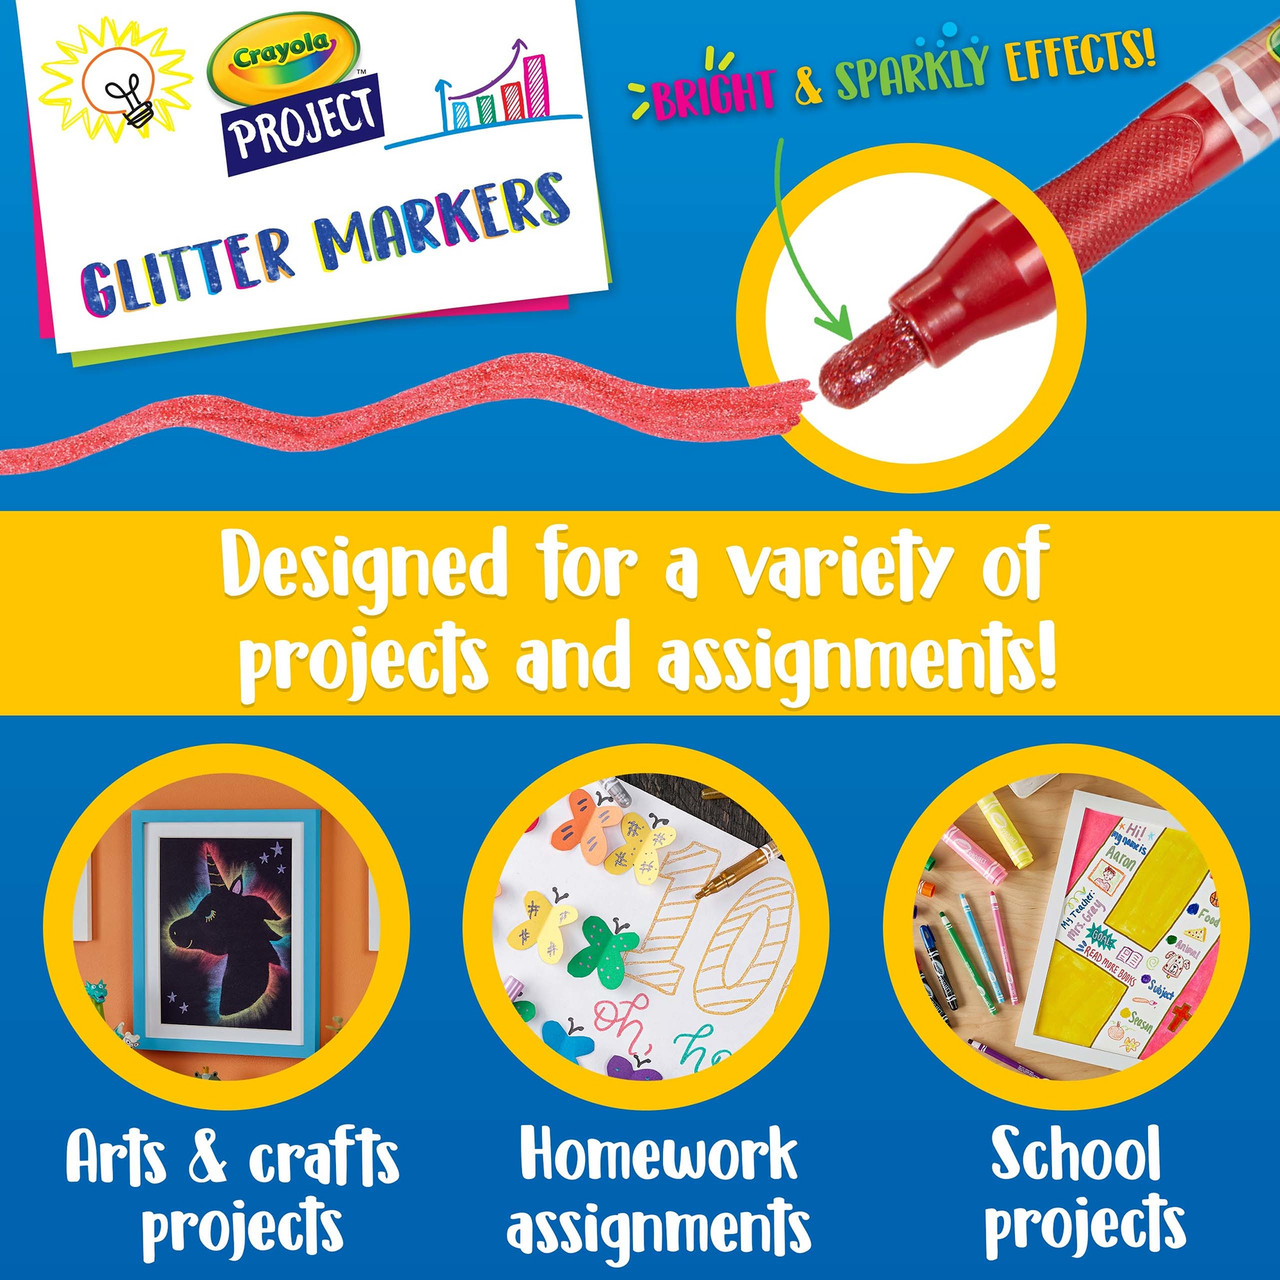 Crayola Project Markers 6/Pkg-Glitter Colors 58-8351 - GettyCrafts